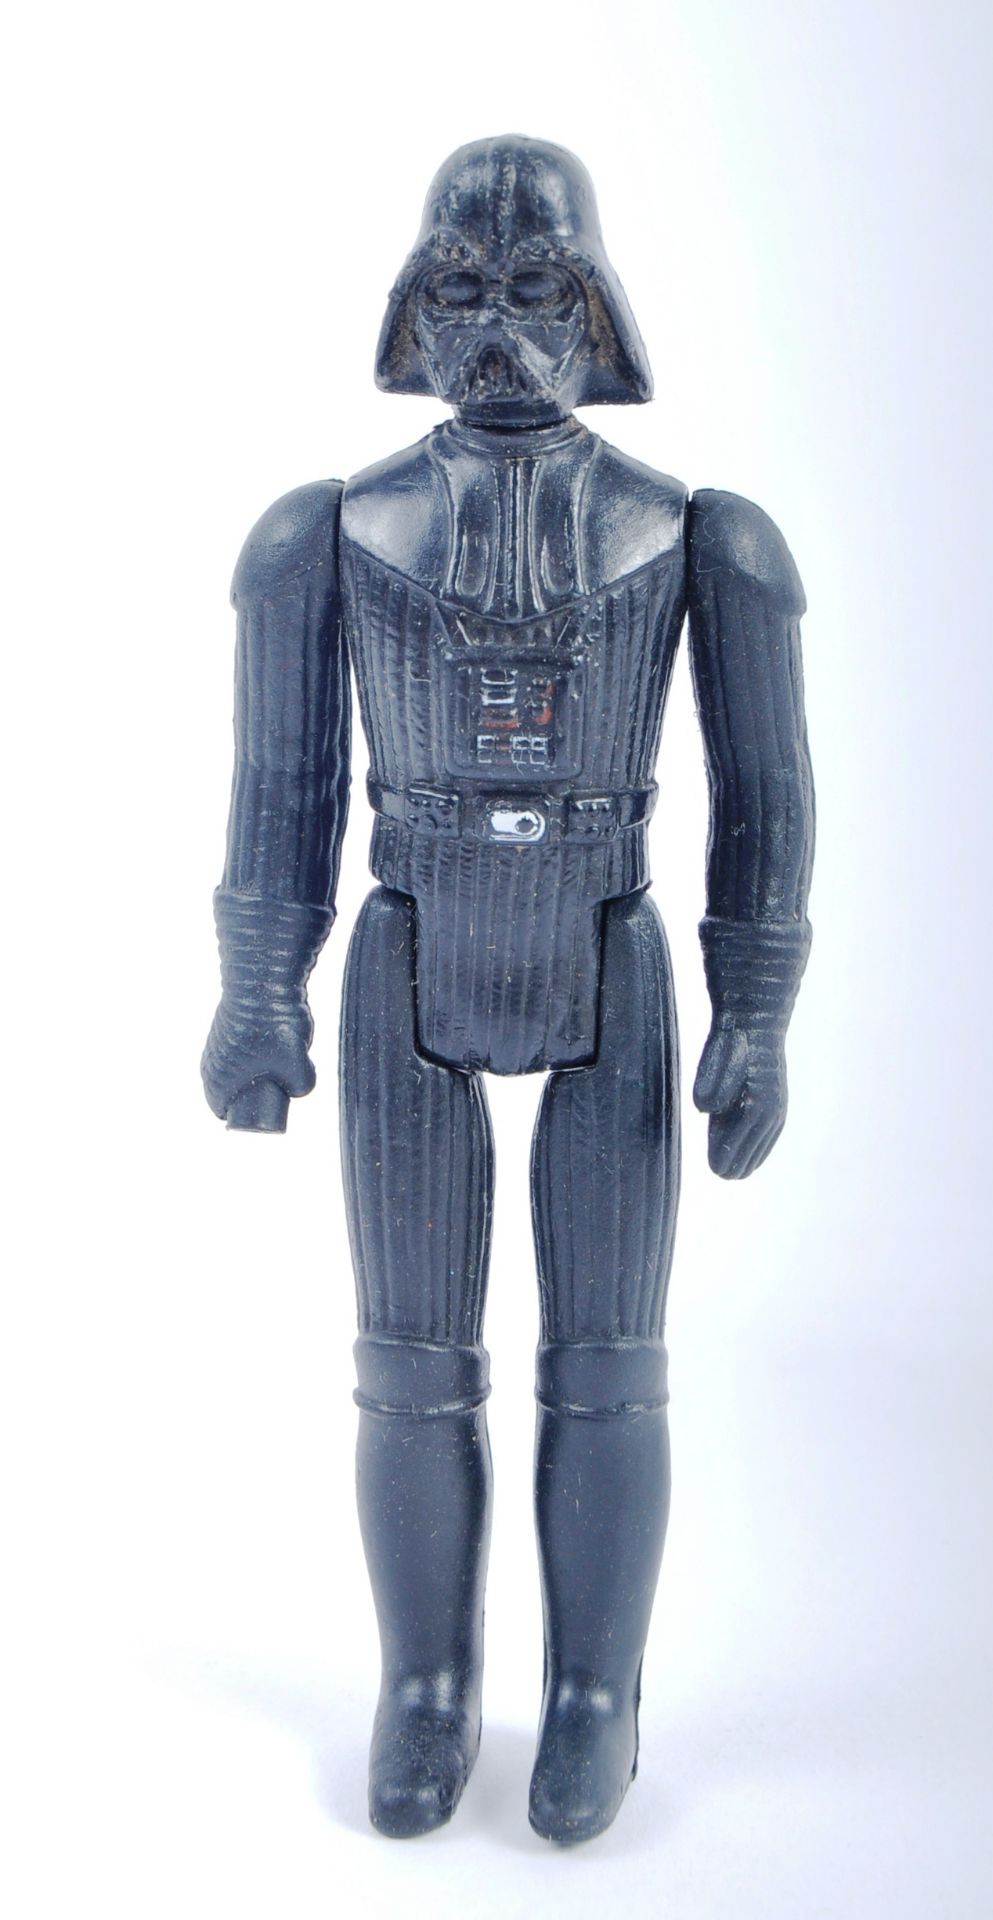 COLLECTION OF ORIGINAL MALITOY / KENNER STARWARS FIGURES - Image 6 of 6